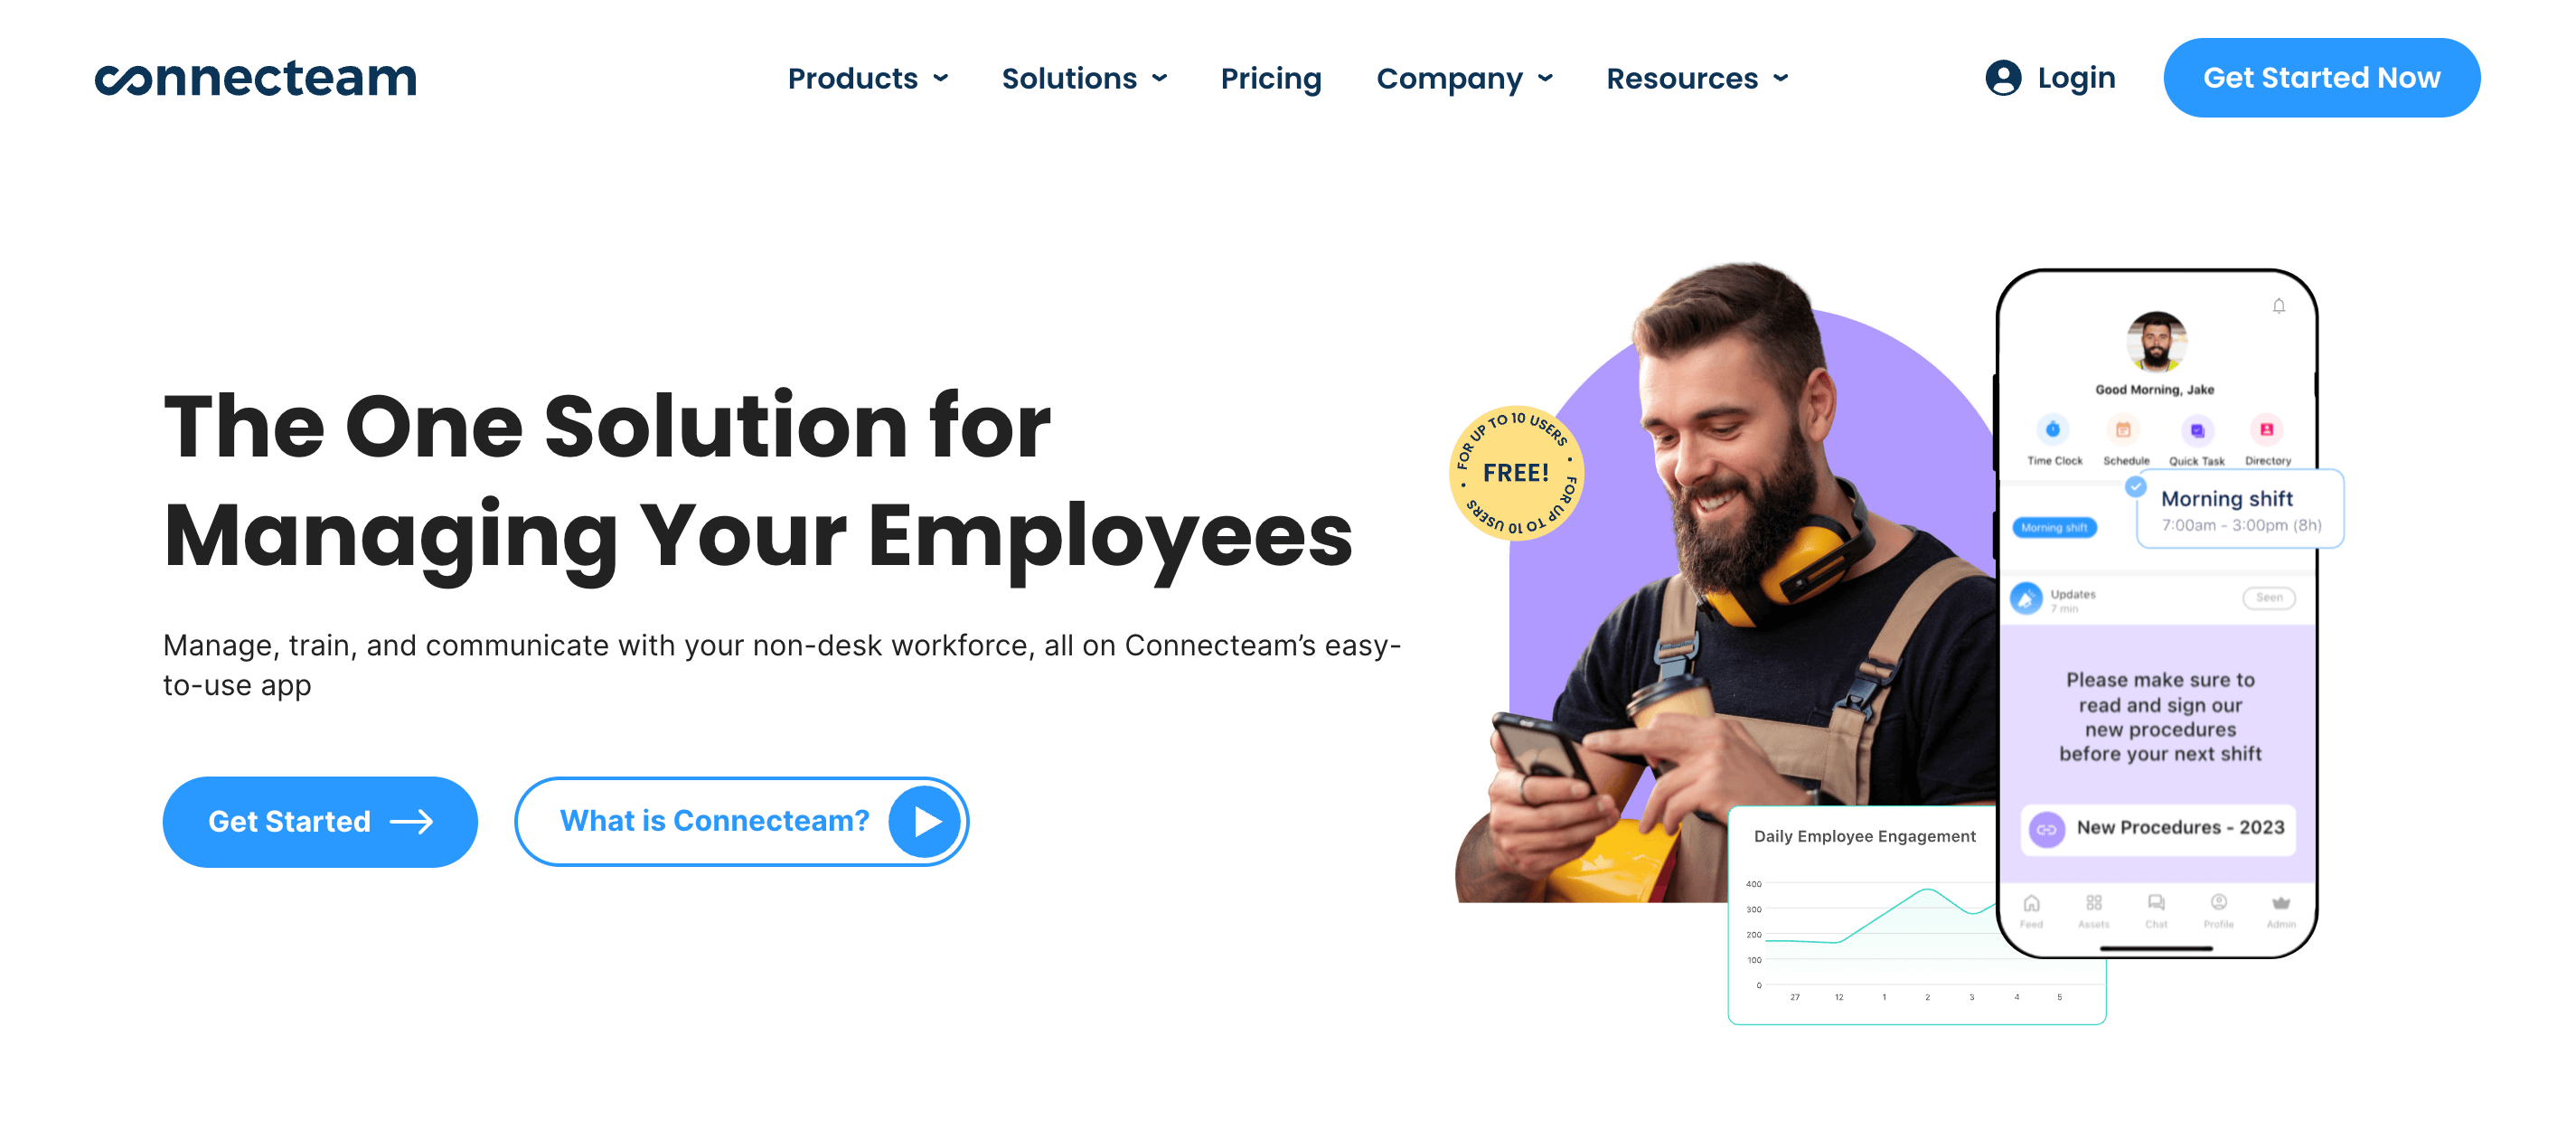 Connecteam homepage